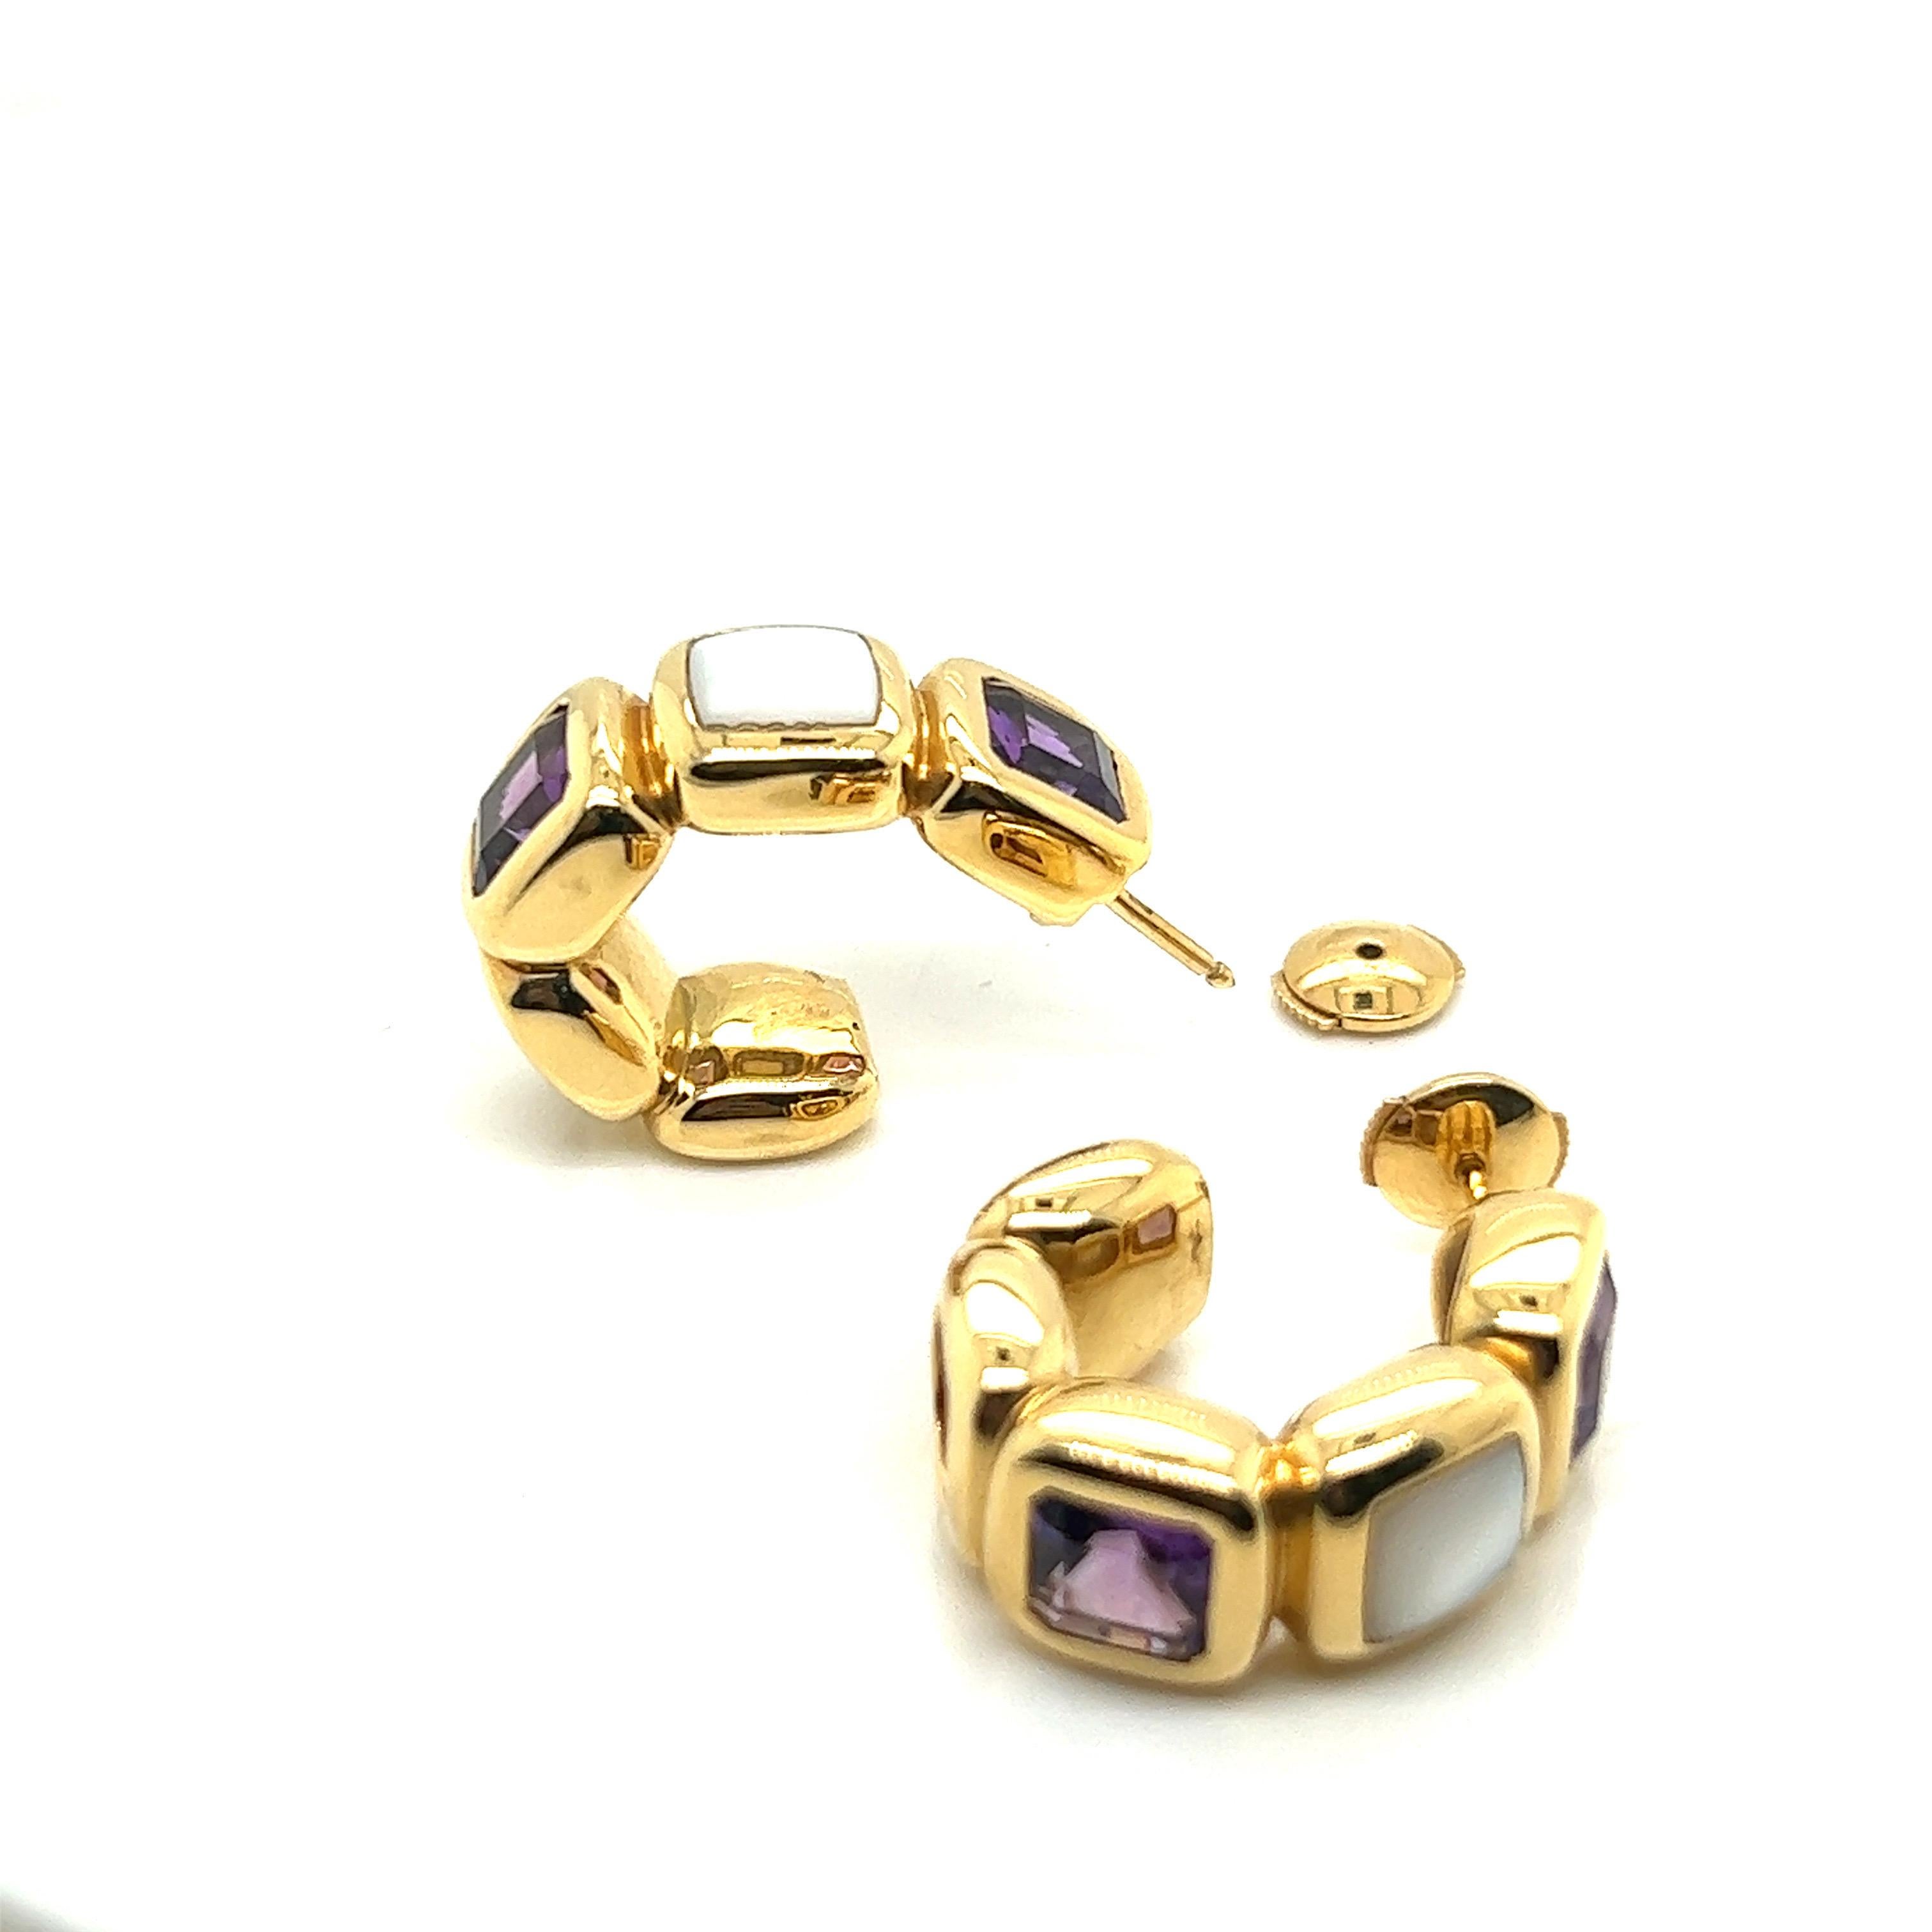 Vintage Earrings in Yellow Gold, Amethysts and Mother-of-pearl For Sale 3